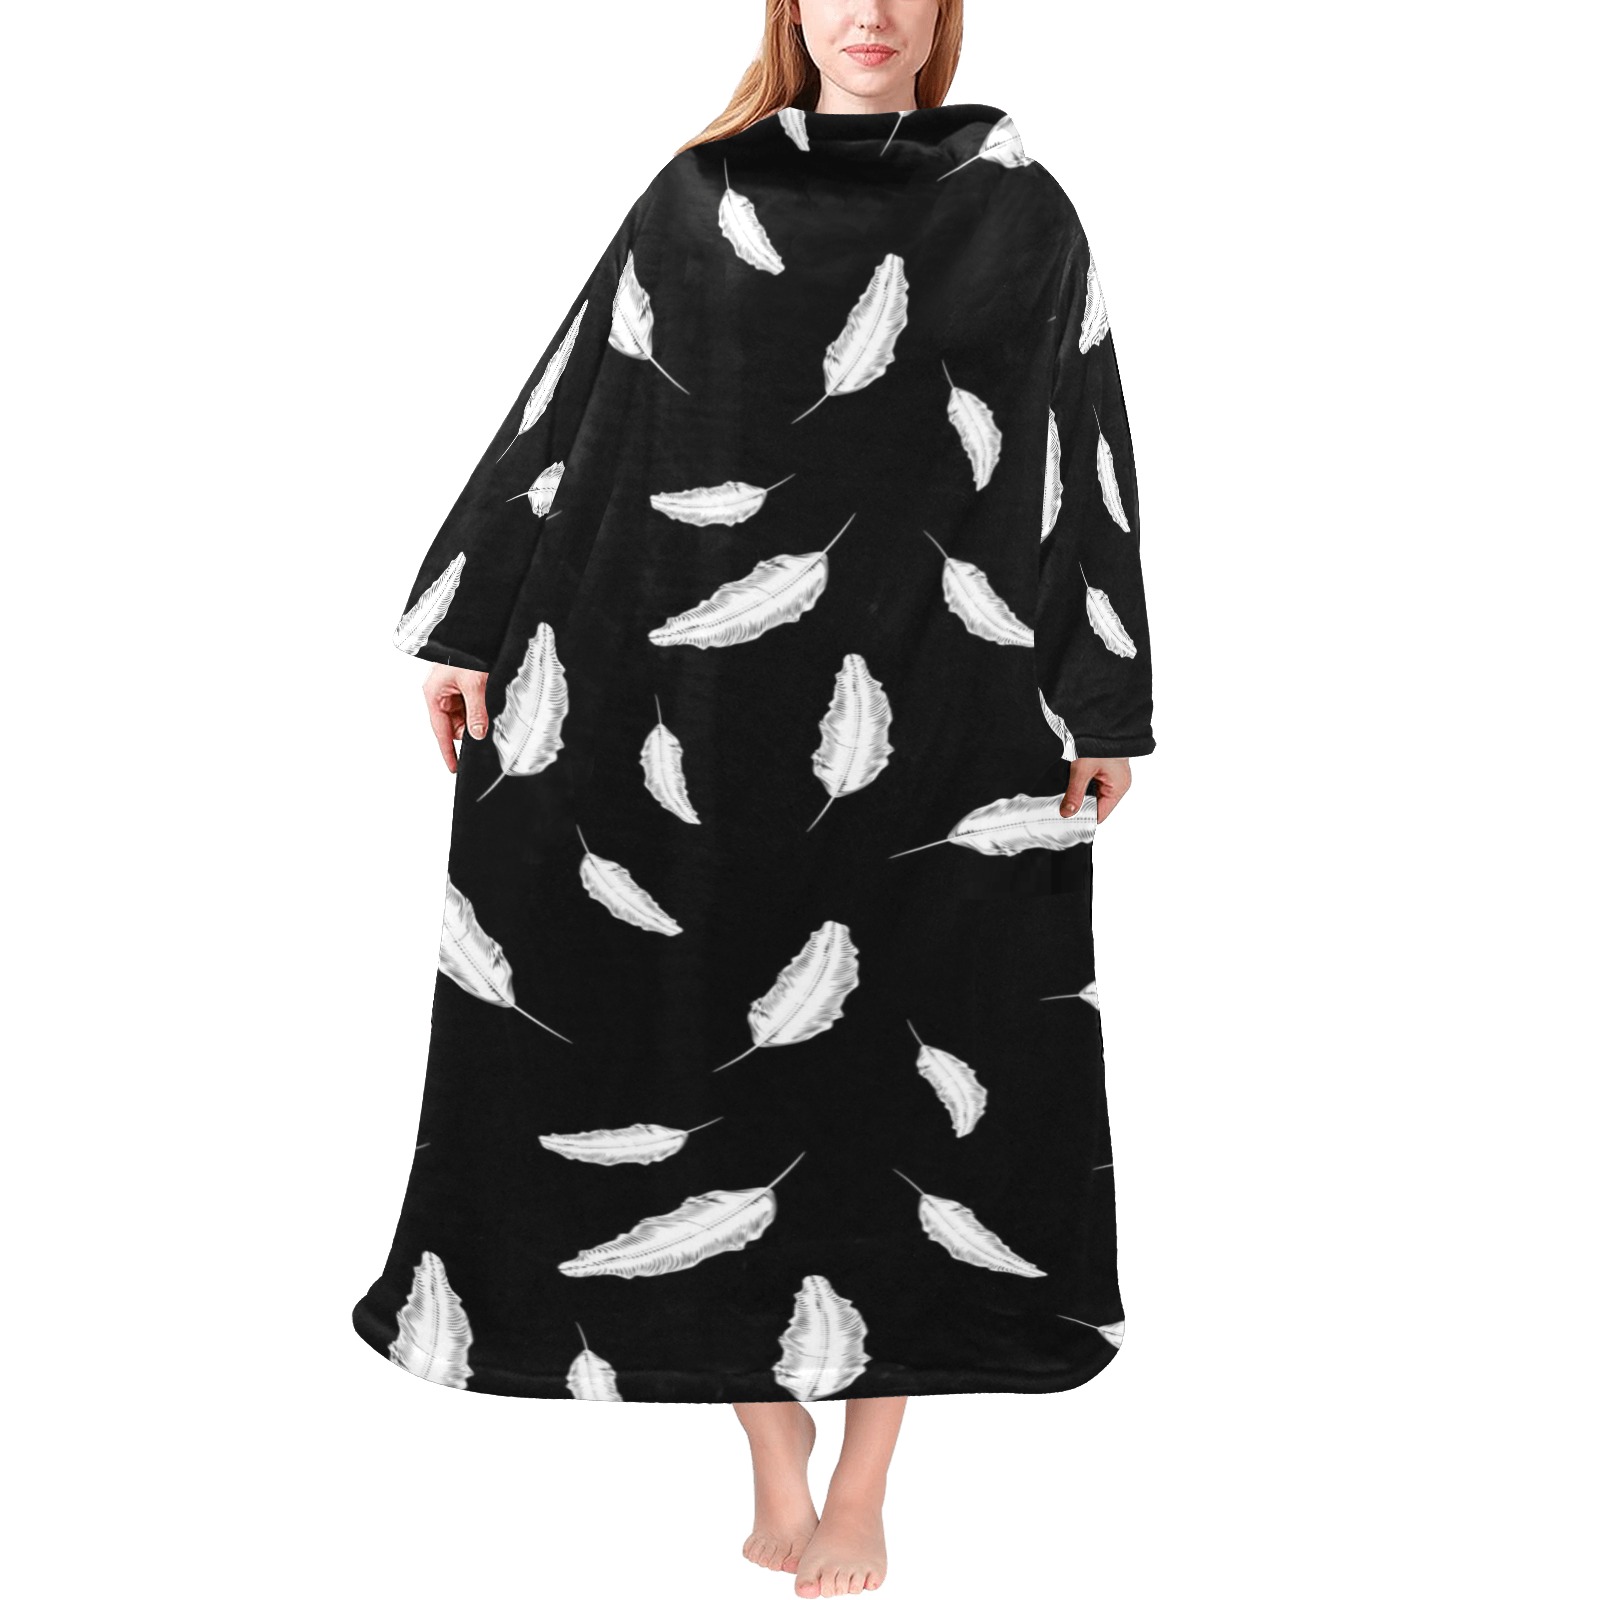 White Feathers Blanket Robe with Sleeves for Adults